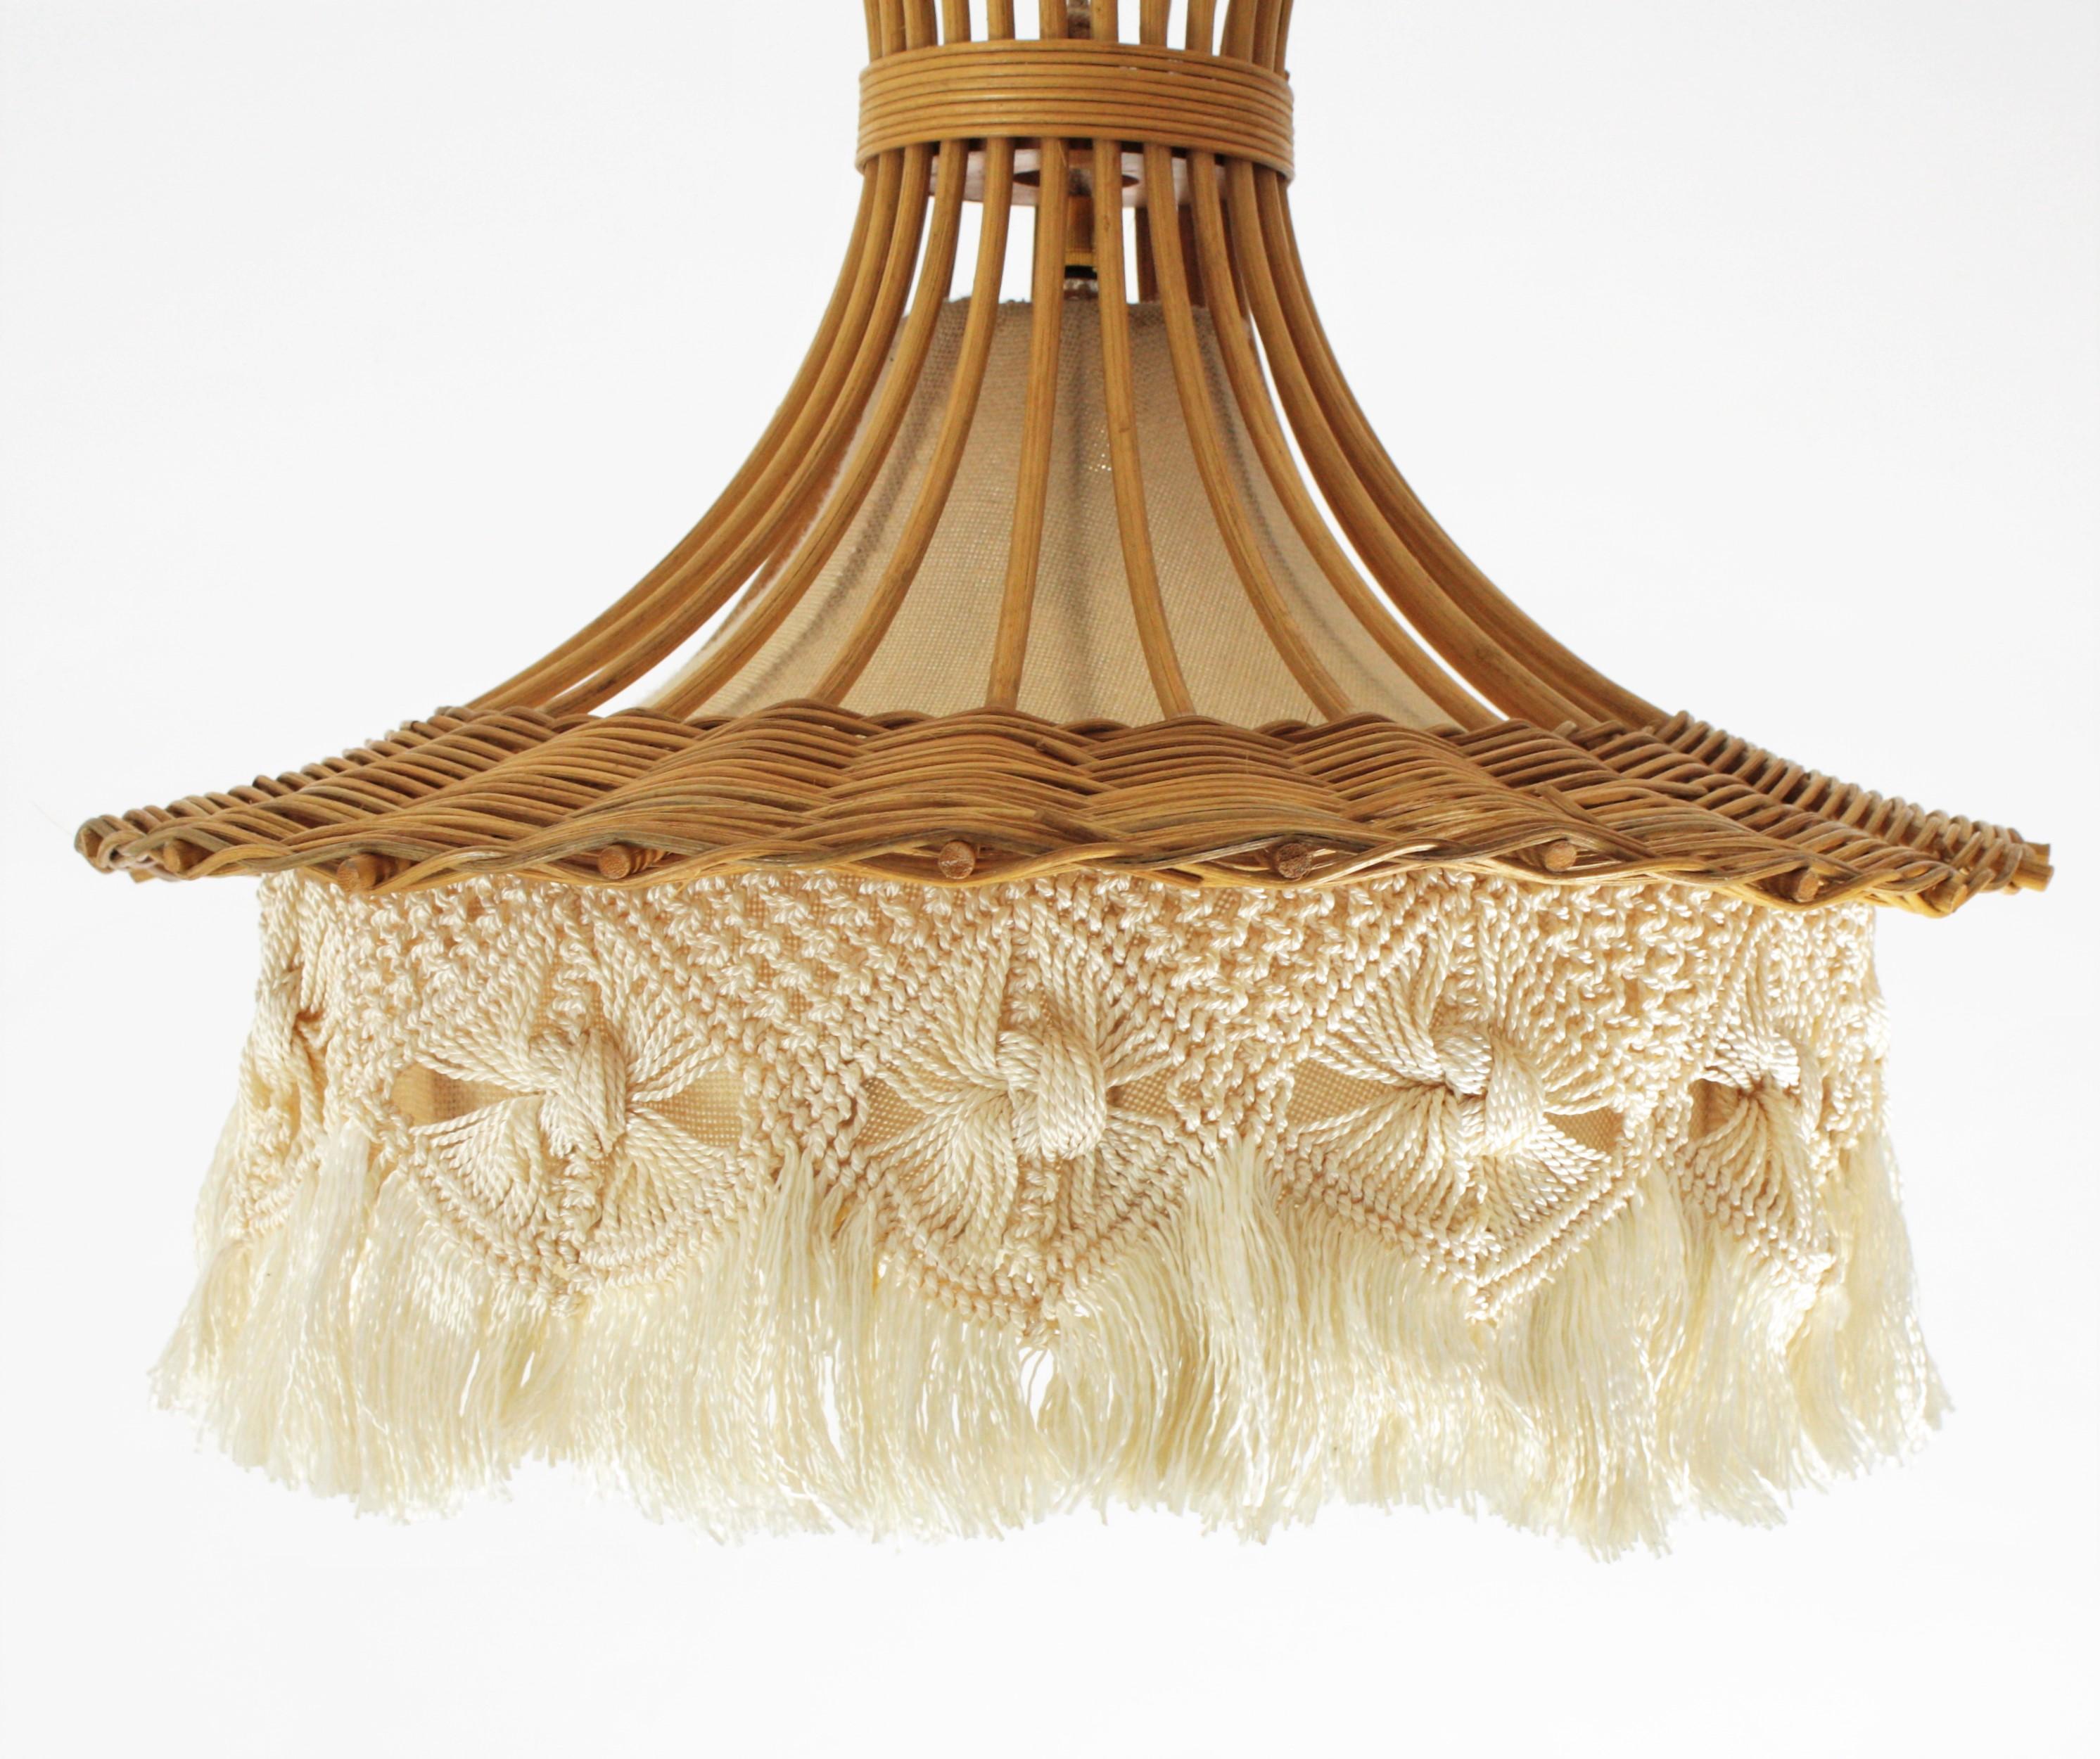 Stylish handcrafted rattan and wicker pagoda shaped chandelier with macrame and fringed bottom. France, 1960s-1970s.
This beautiful pendant features a pagoda shaped shade handcrafted with rattan canes joined between them with wicker canes. It has